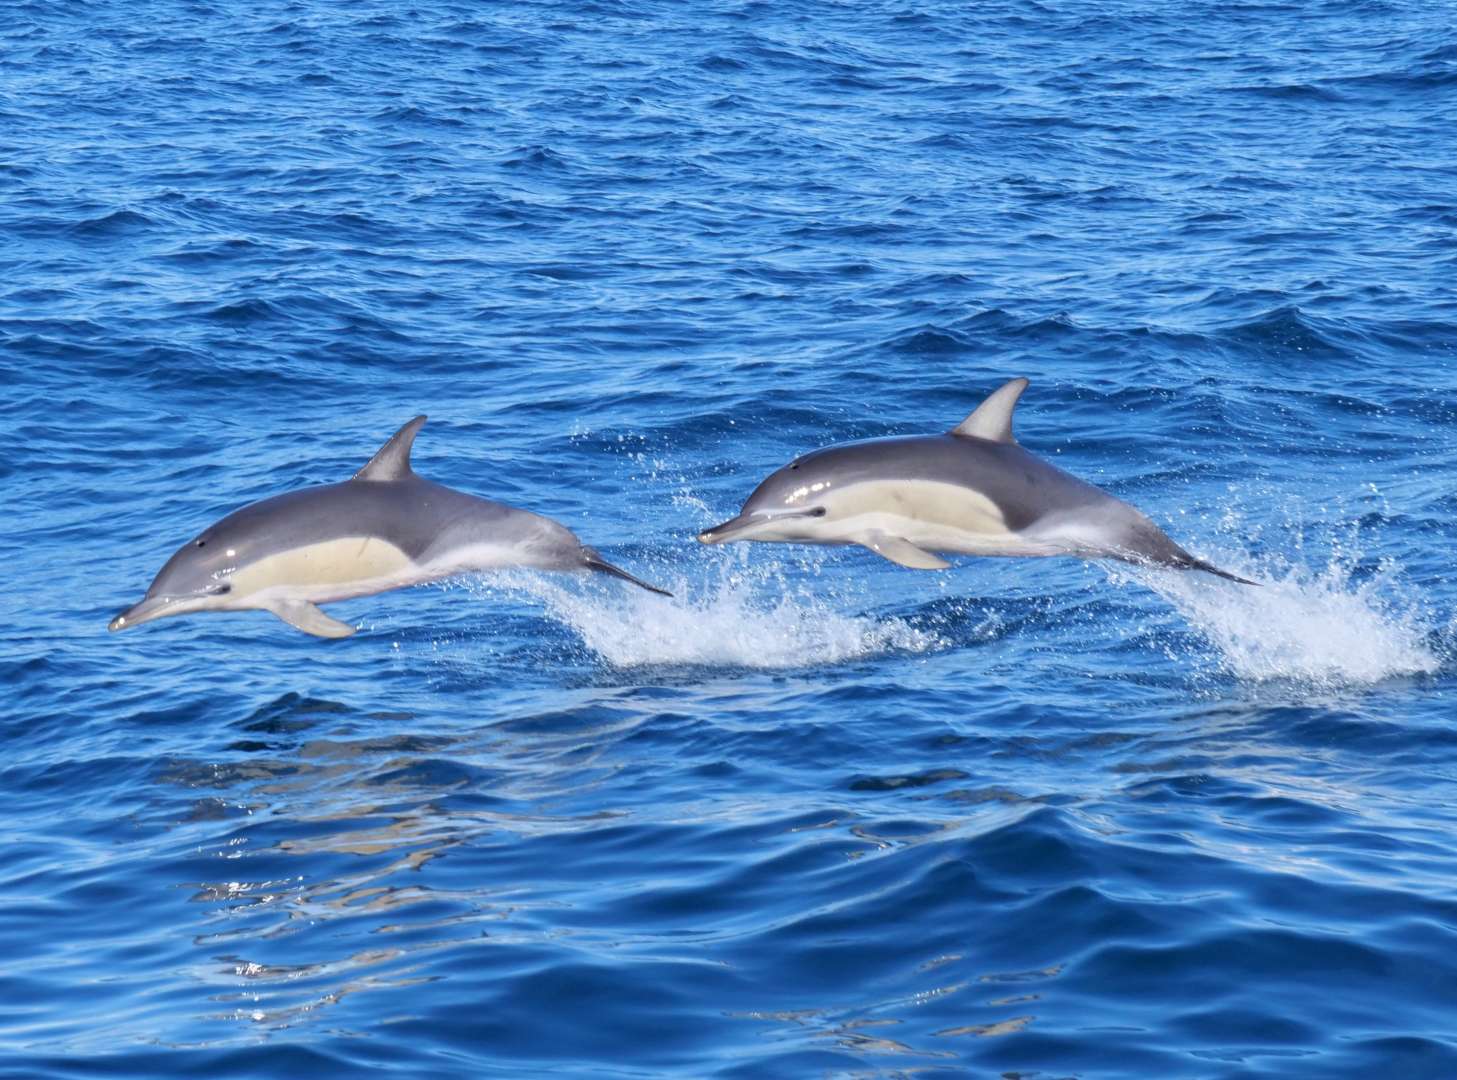 Wild Dolphin Encounter with Jumping common dolphins